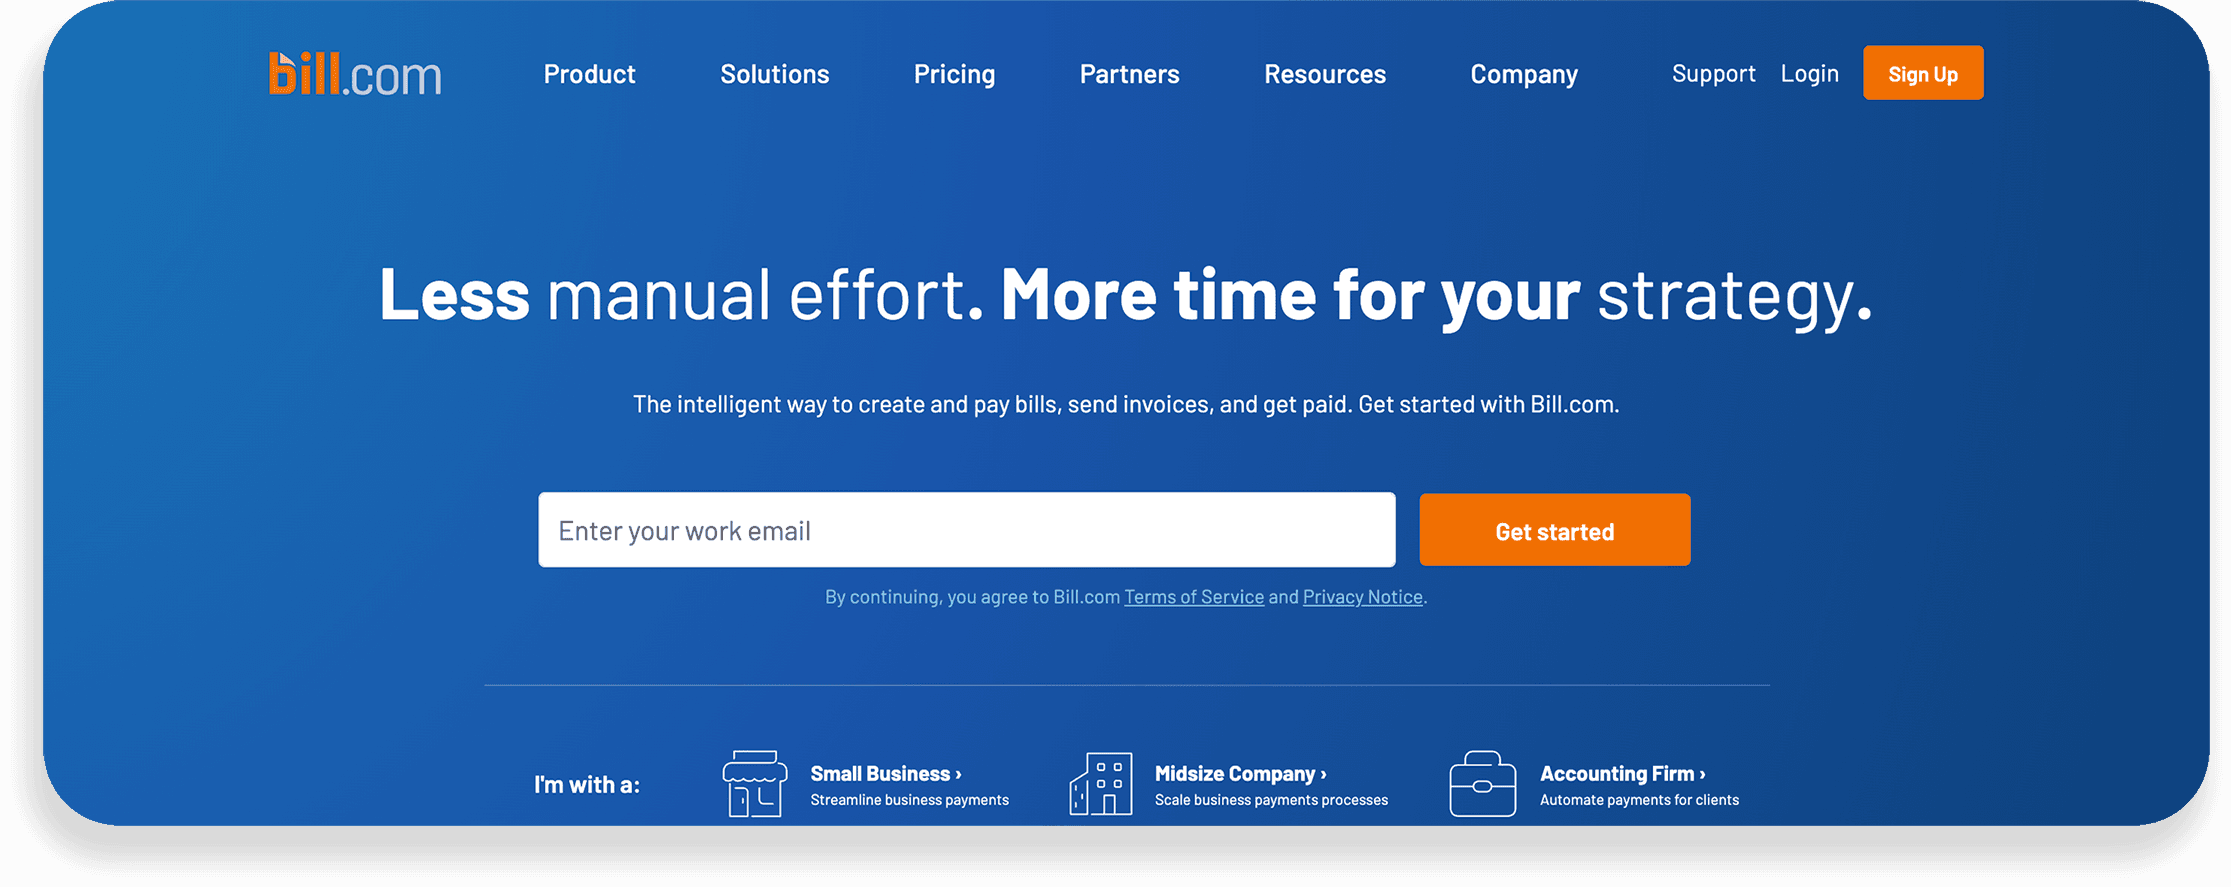 Bill.com - All-in-one Accounts Payable and Accounts Receivable Software for Small Businesses